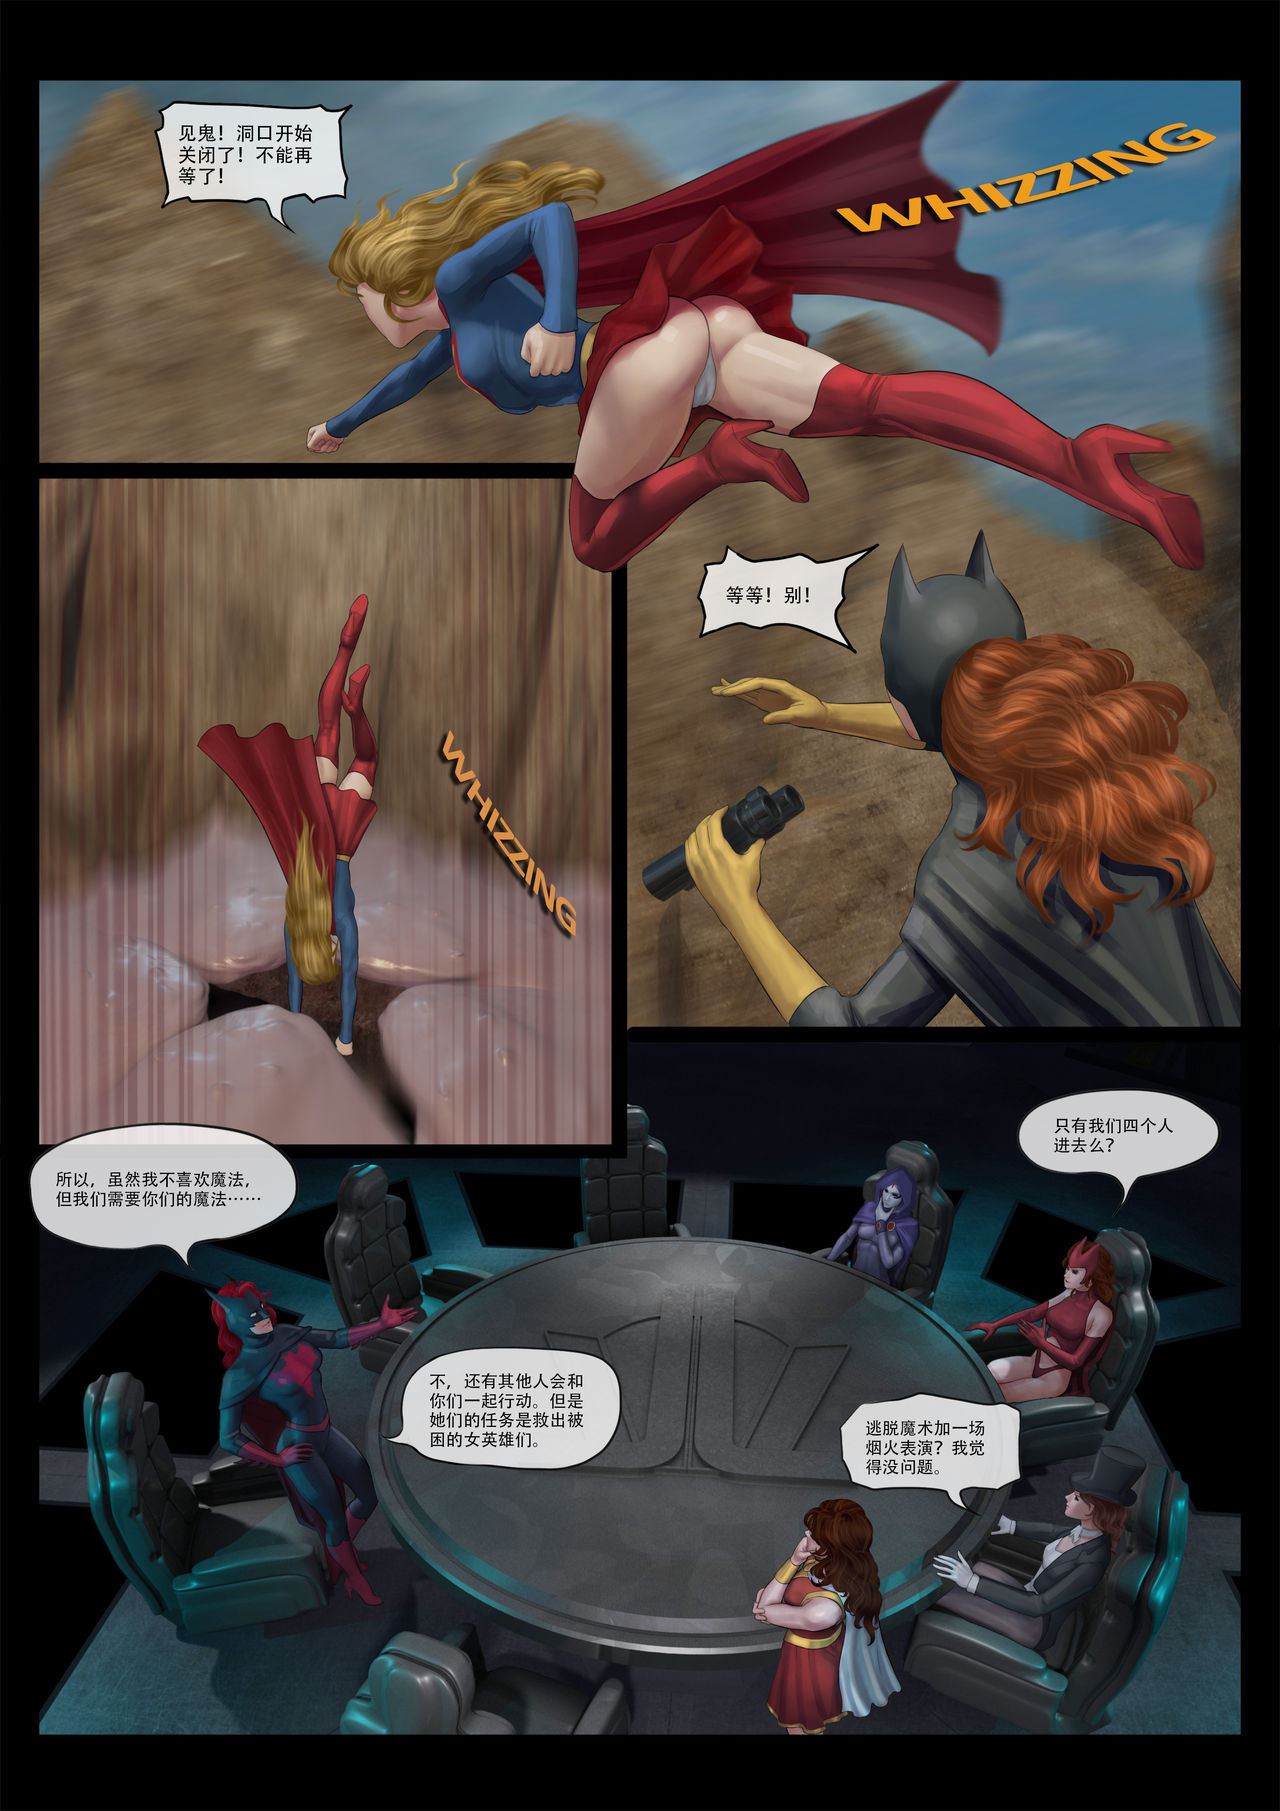 [Feather] - Avengers nightmare 01- 04 page 43 full